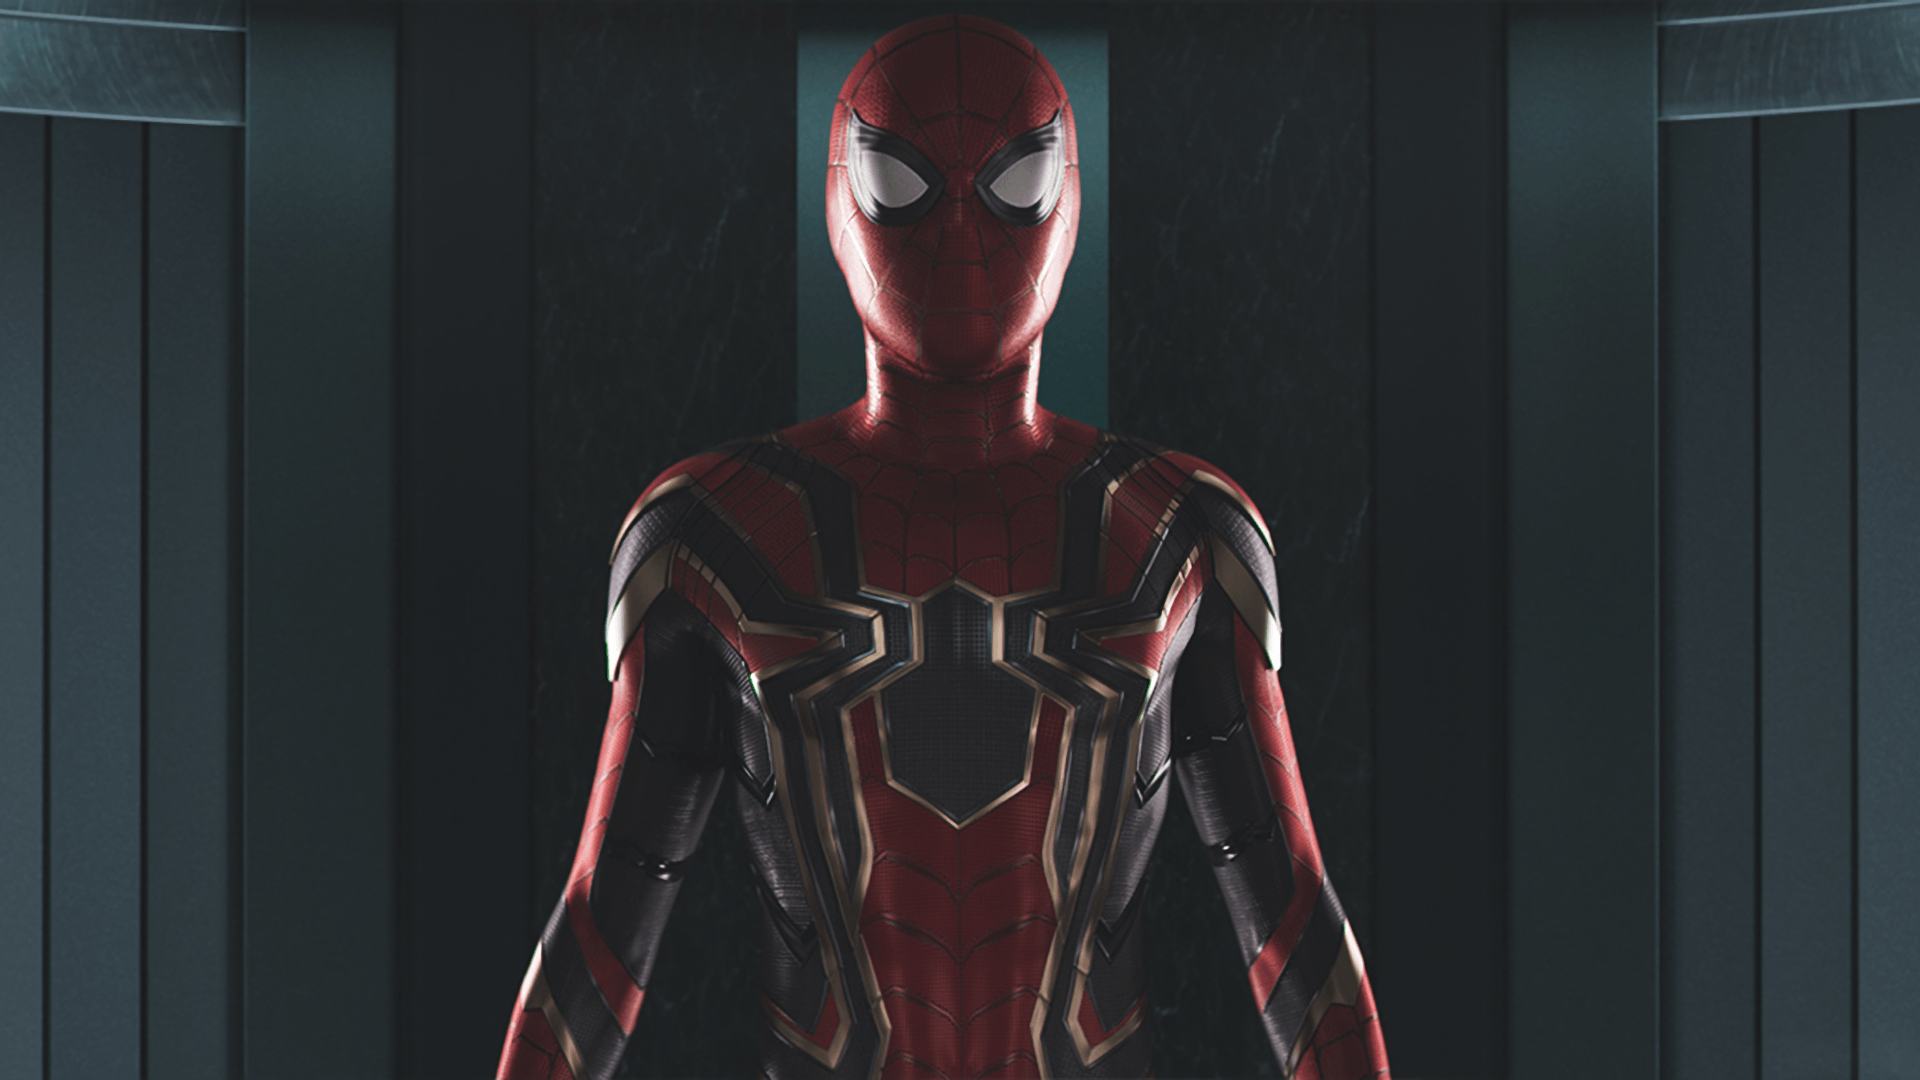 Spider Man New Costume For Homecoming And Avengers, Full HD Wallpaper